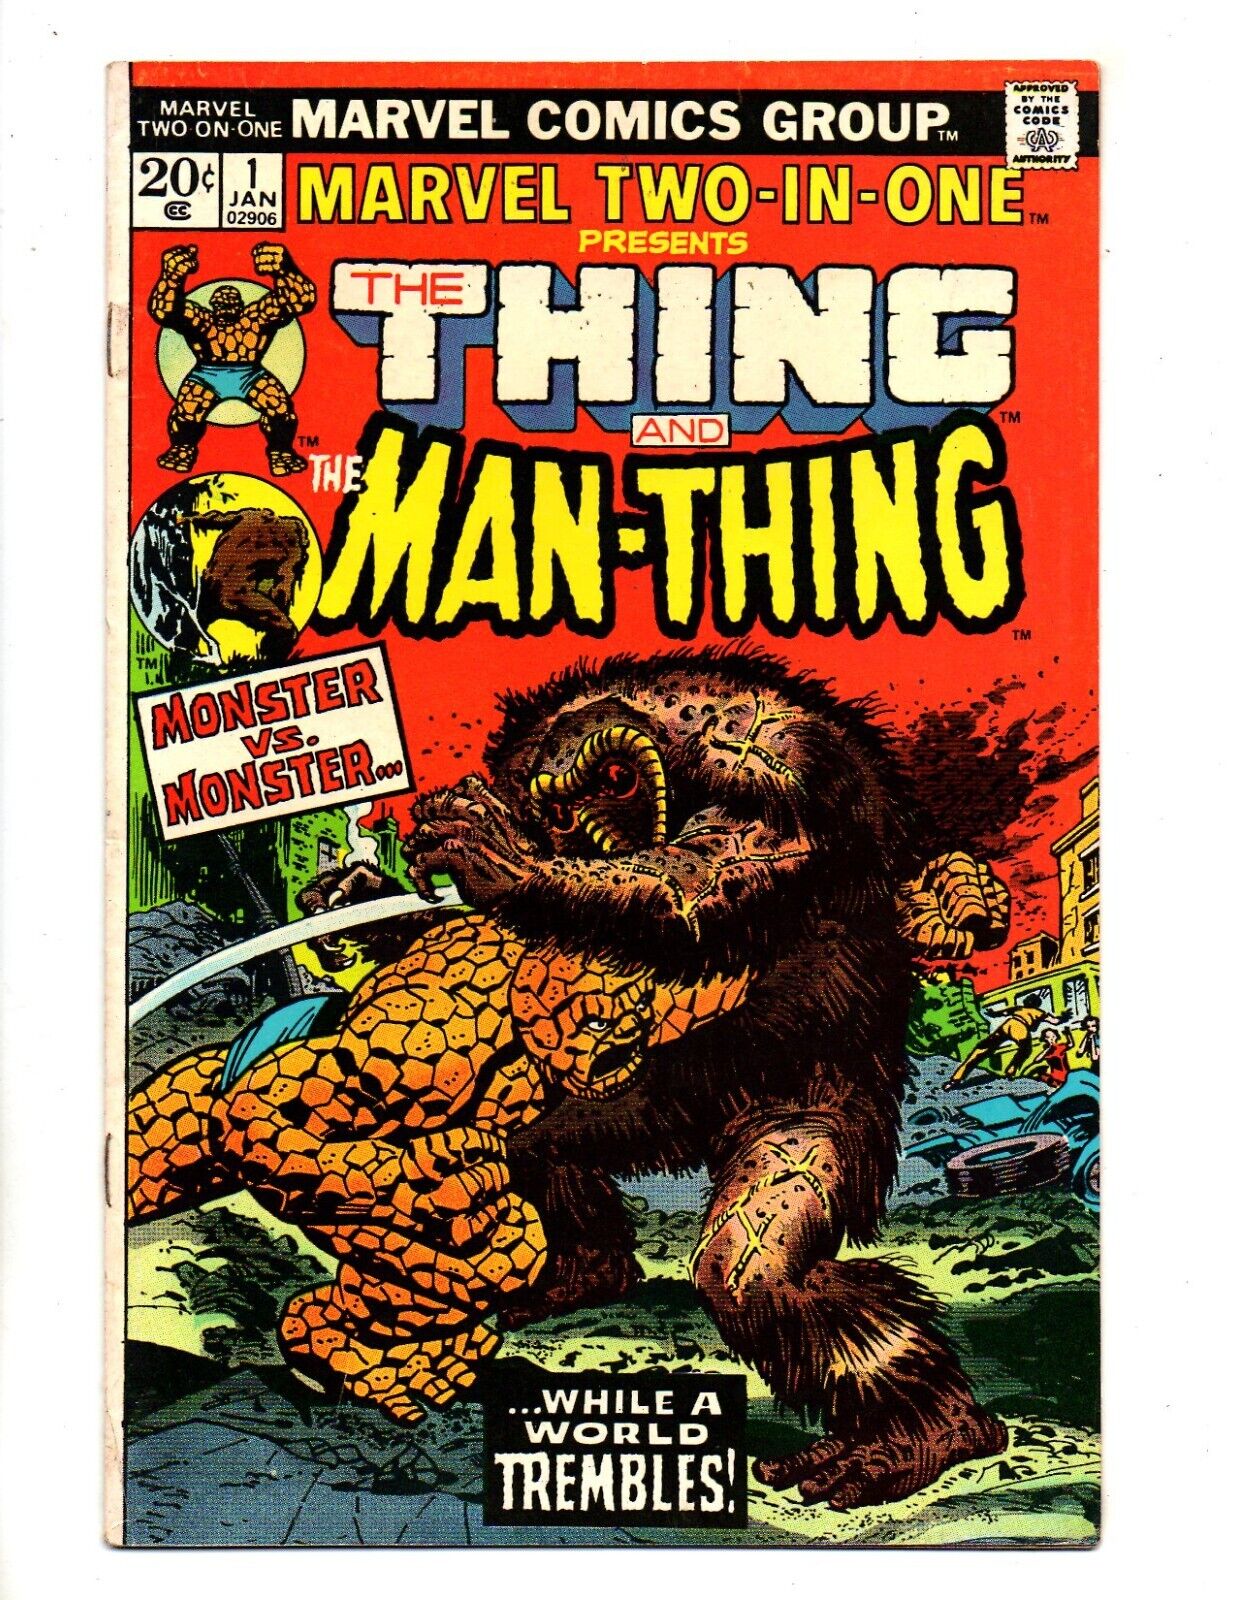 MARVEL TWO-IN-ONE #1  VG+ 4.5  